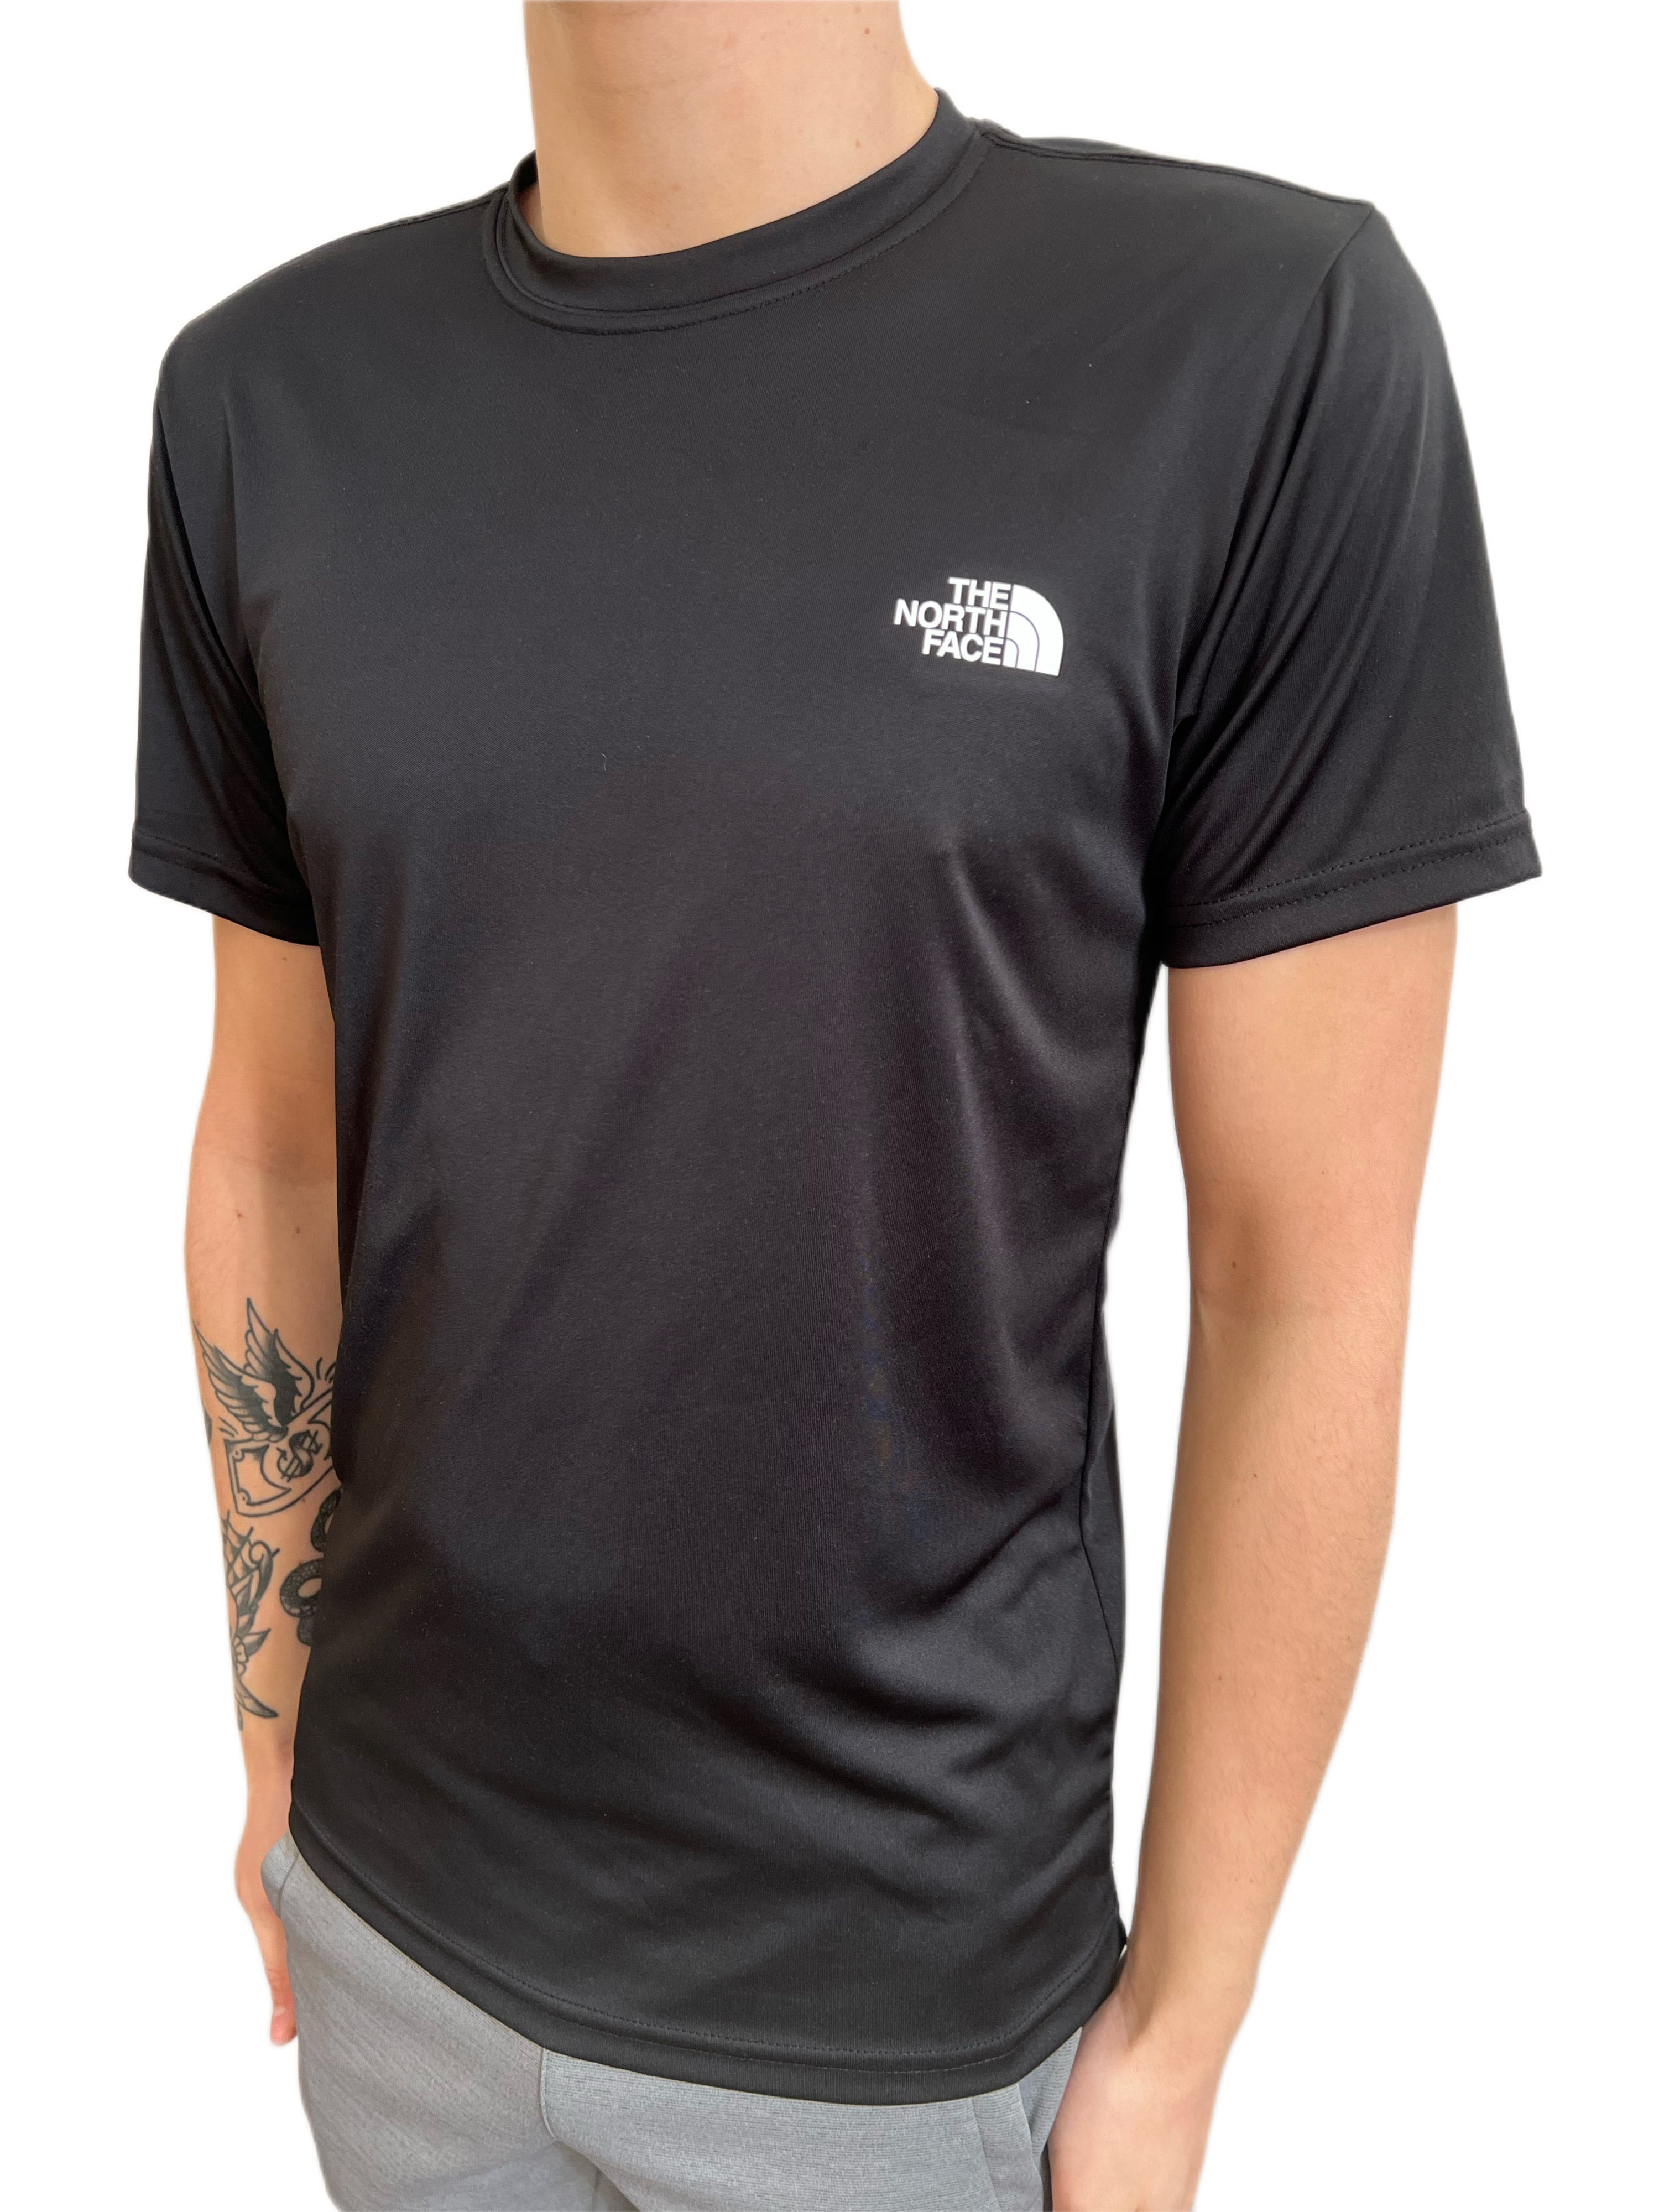 The Black Clothing AMP - – Chevron Tee North Reaxion Face